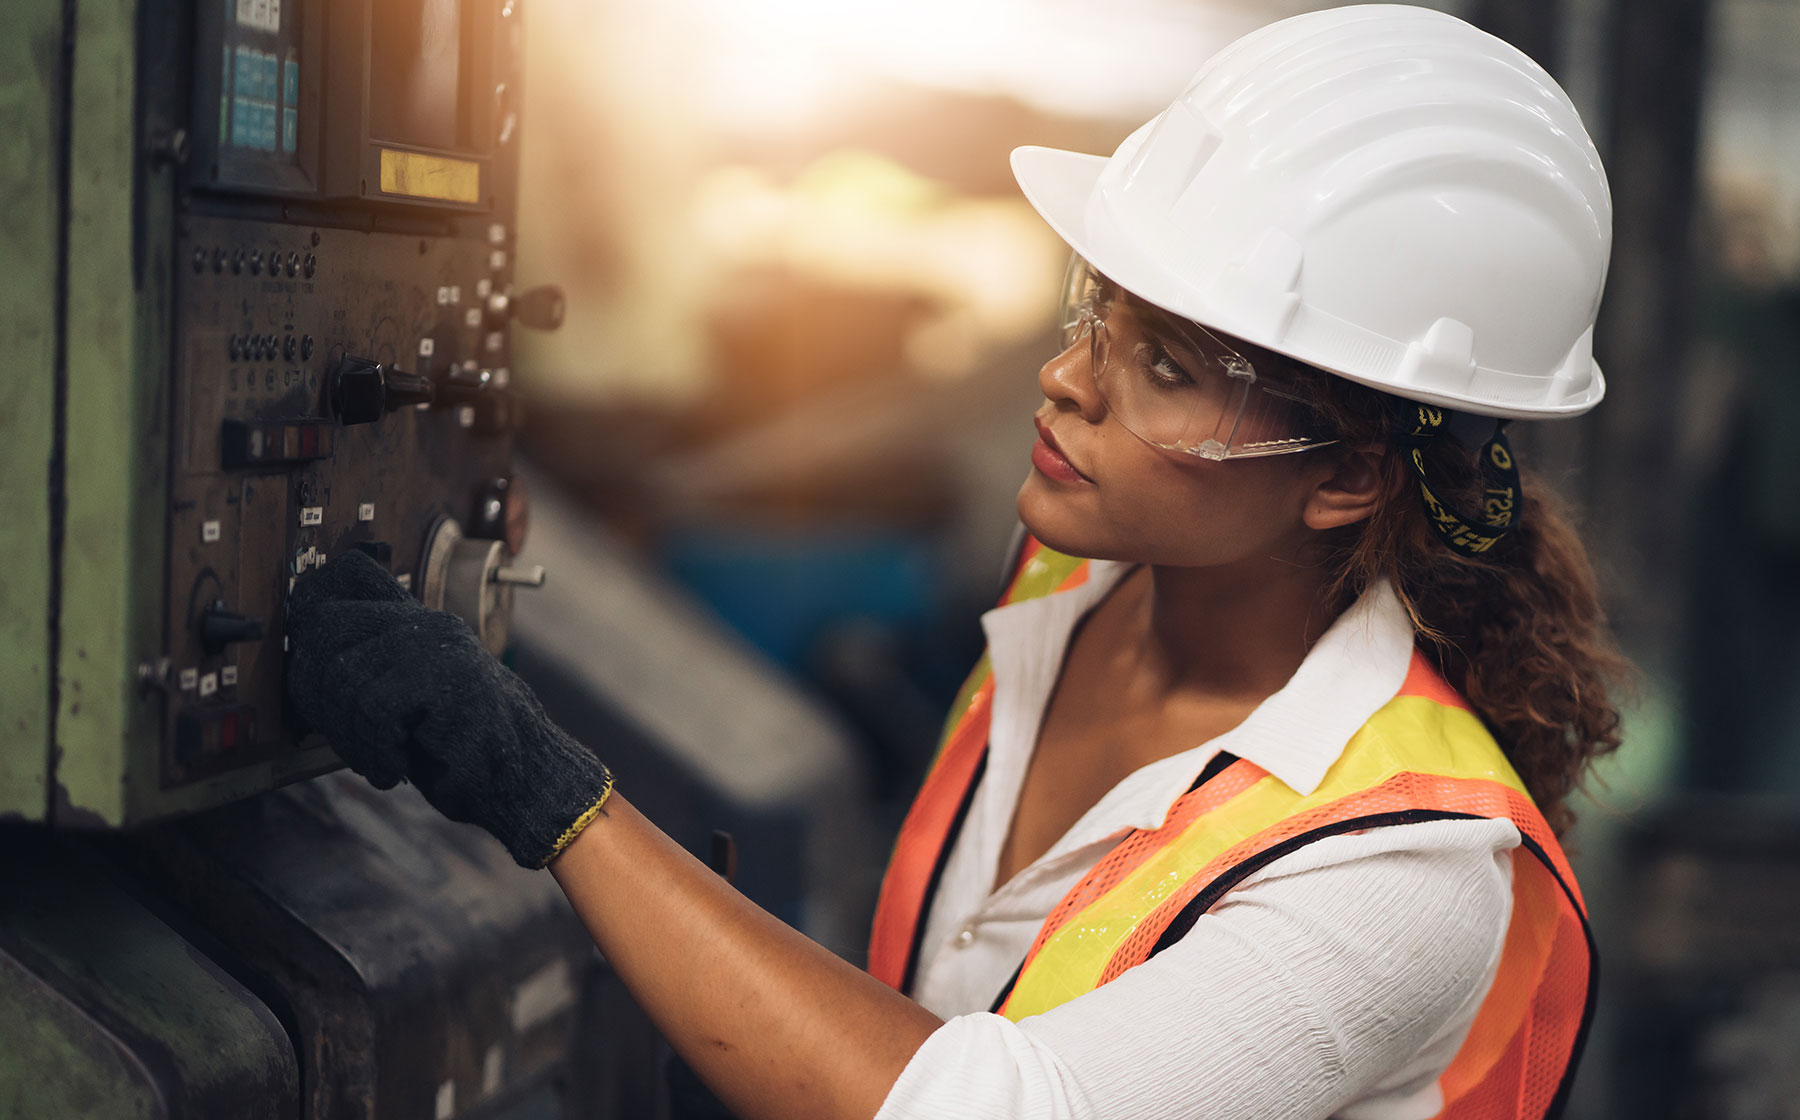 More Women in Construction